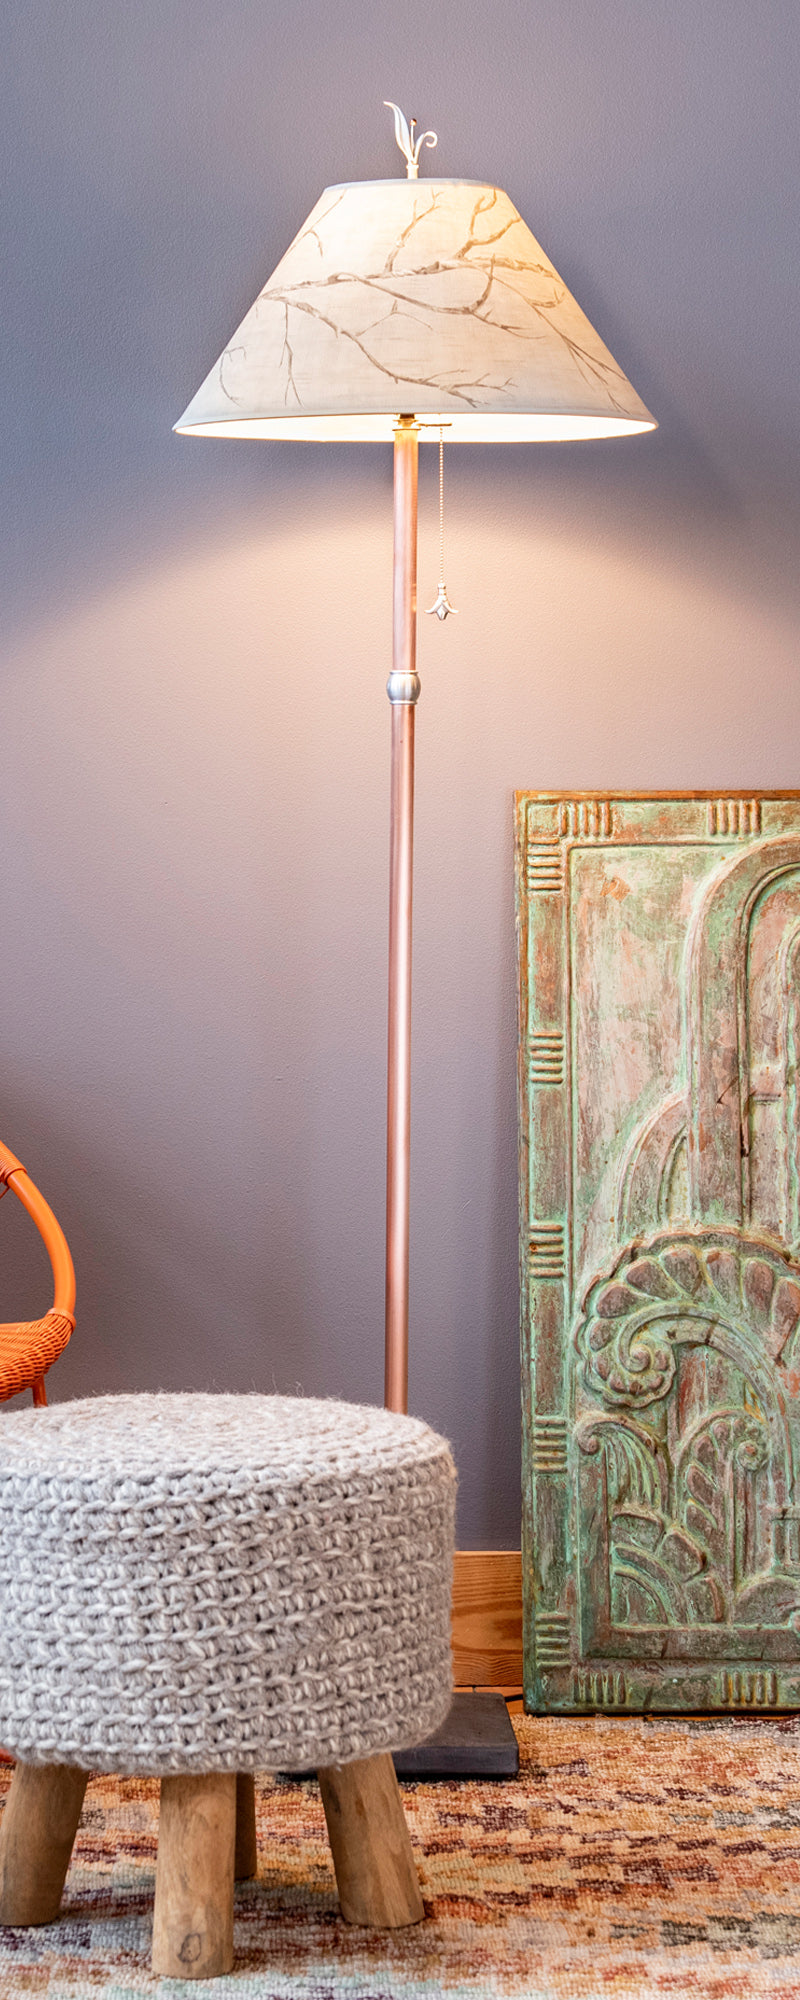 Copper Floor Lamp with Large Conical Shade in Sweeping Branch